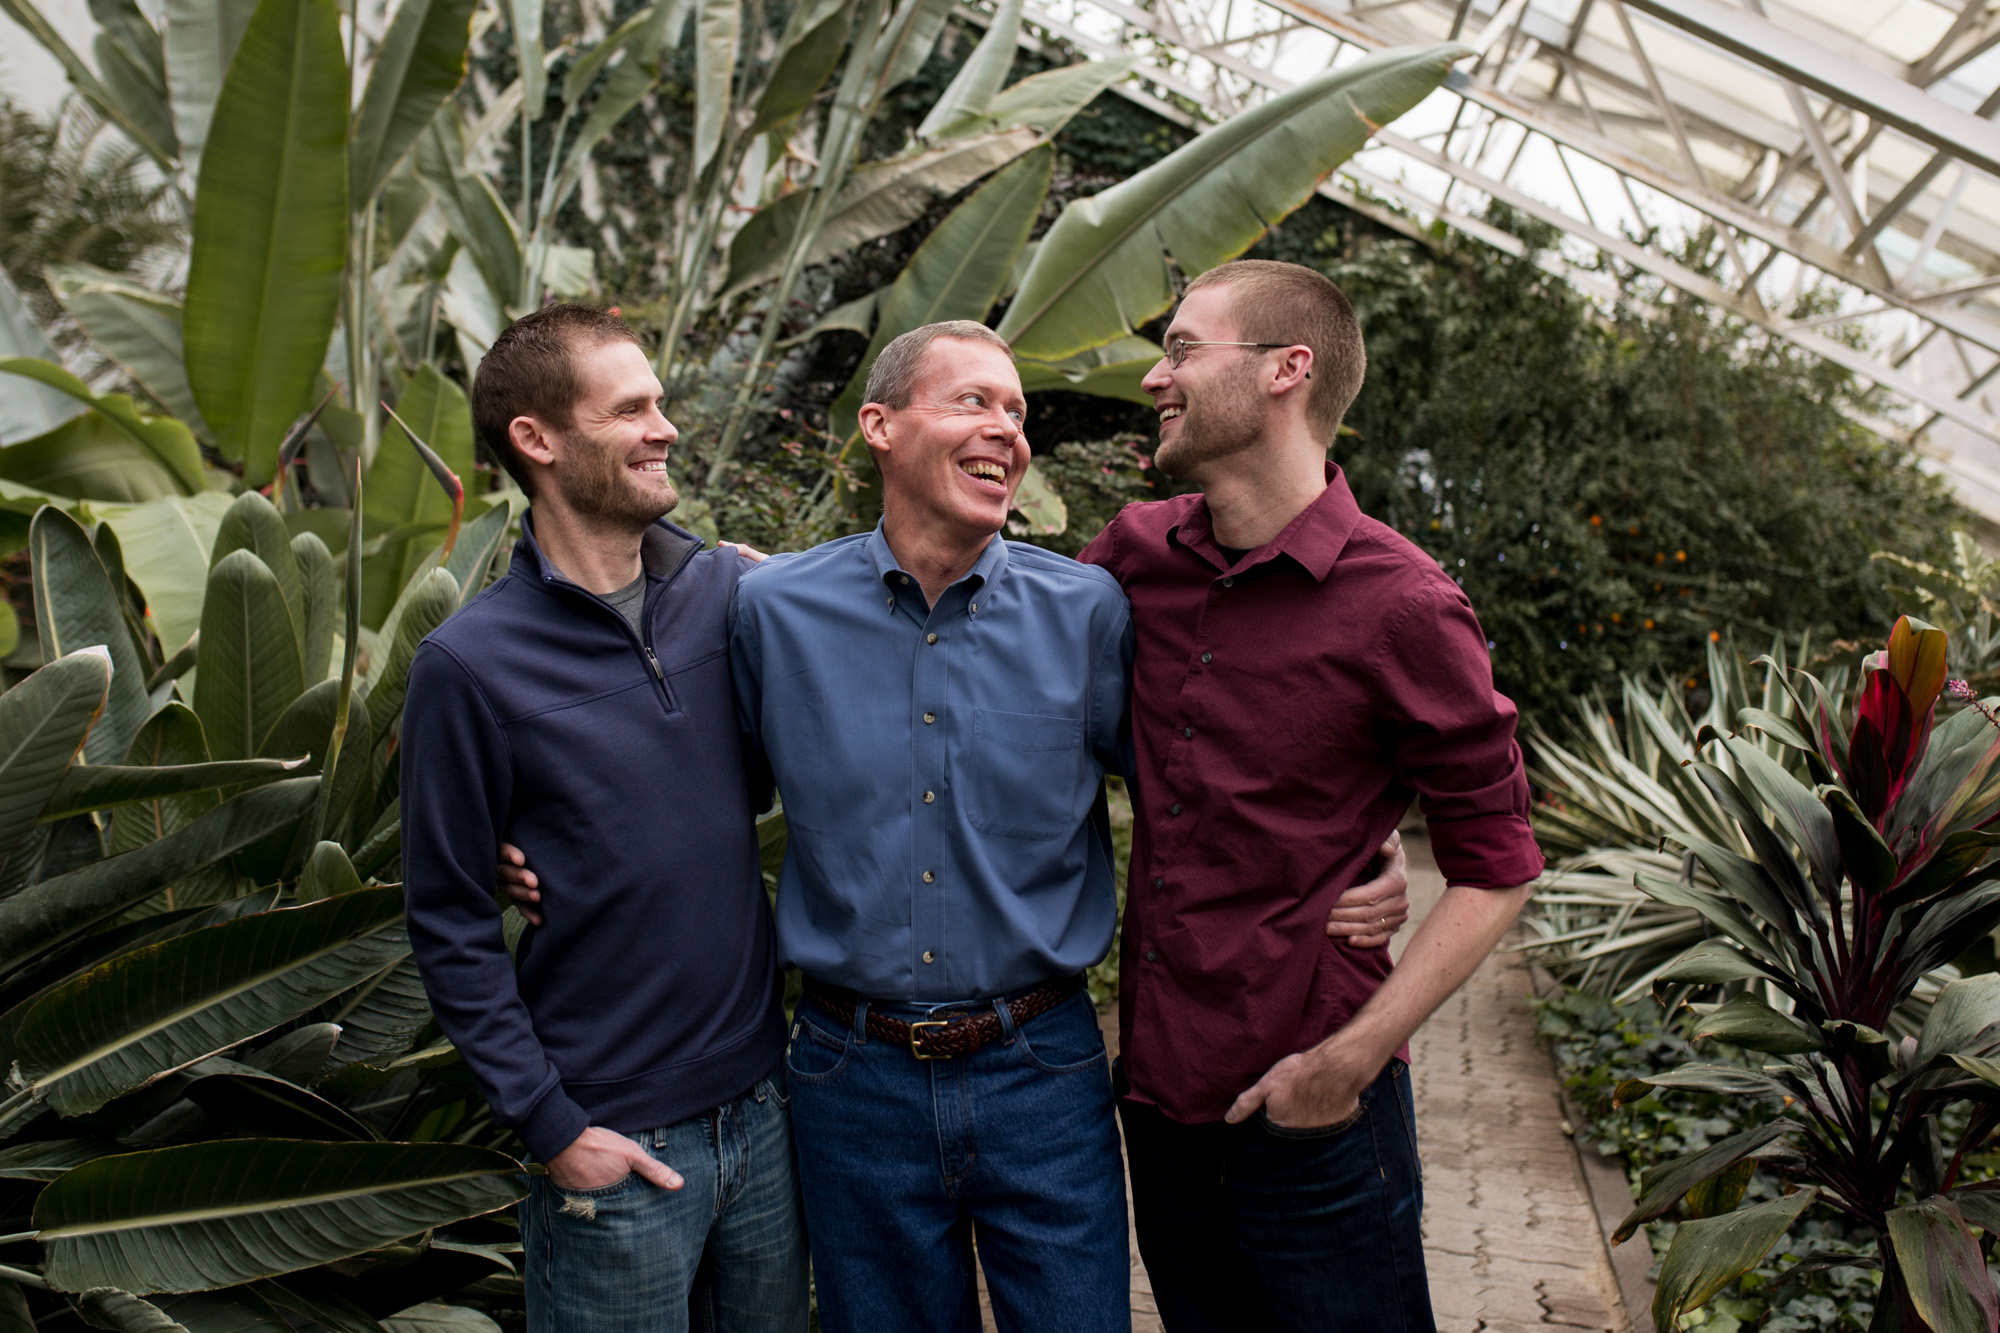 father and sons laugh together during family session at Foellinger-Freimann Botanical Conservatory in Fort Wayne Indiana